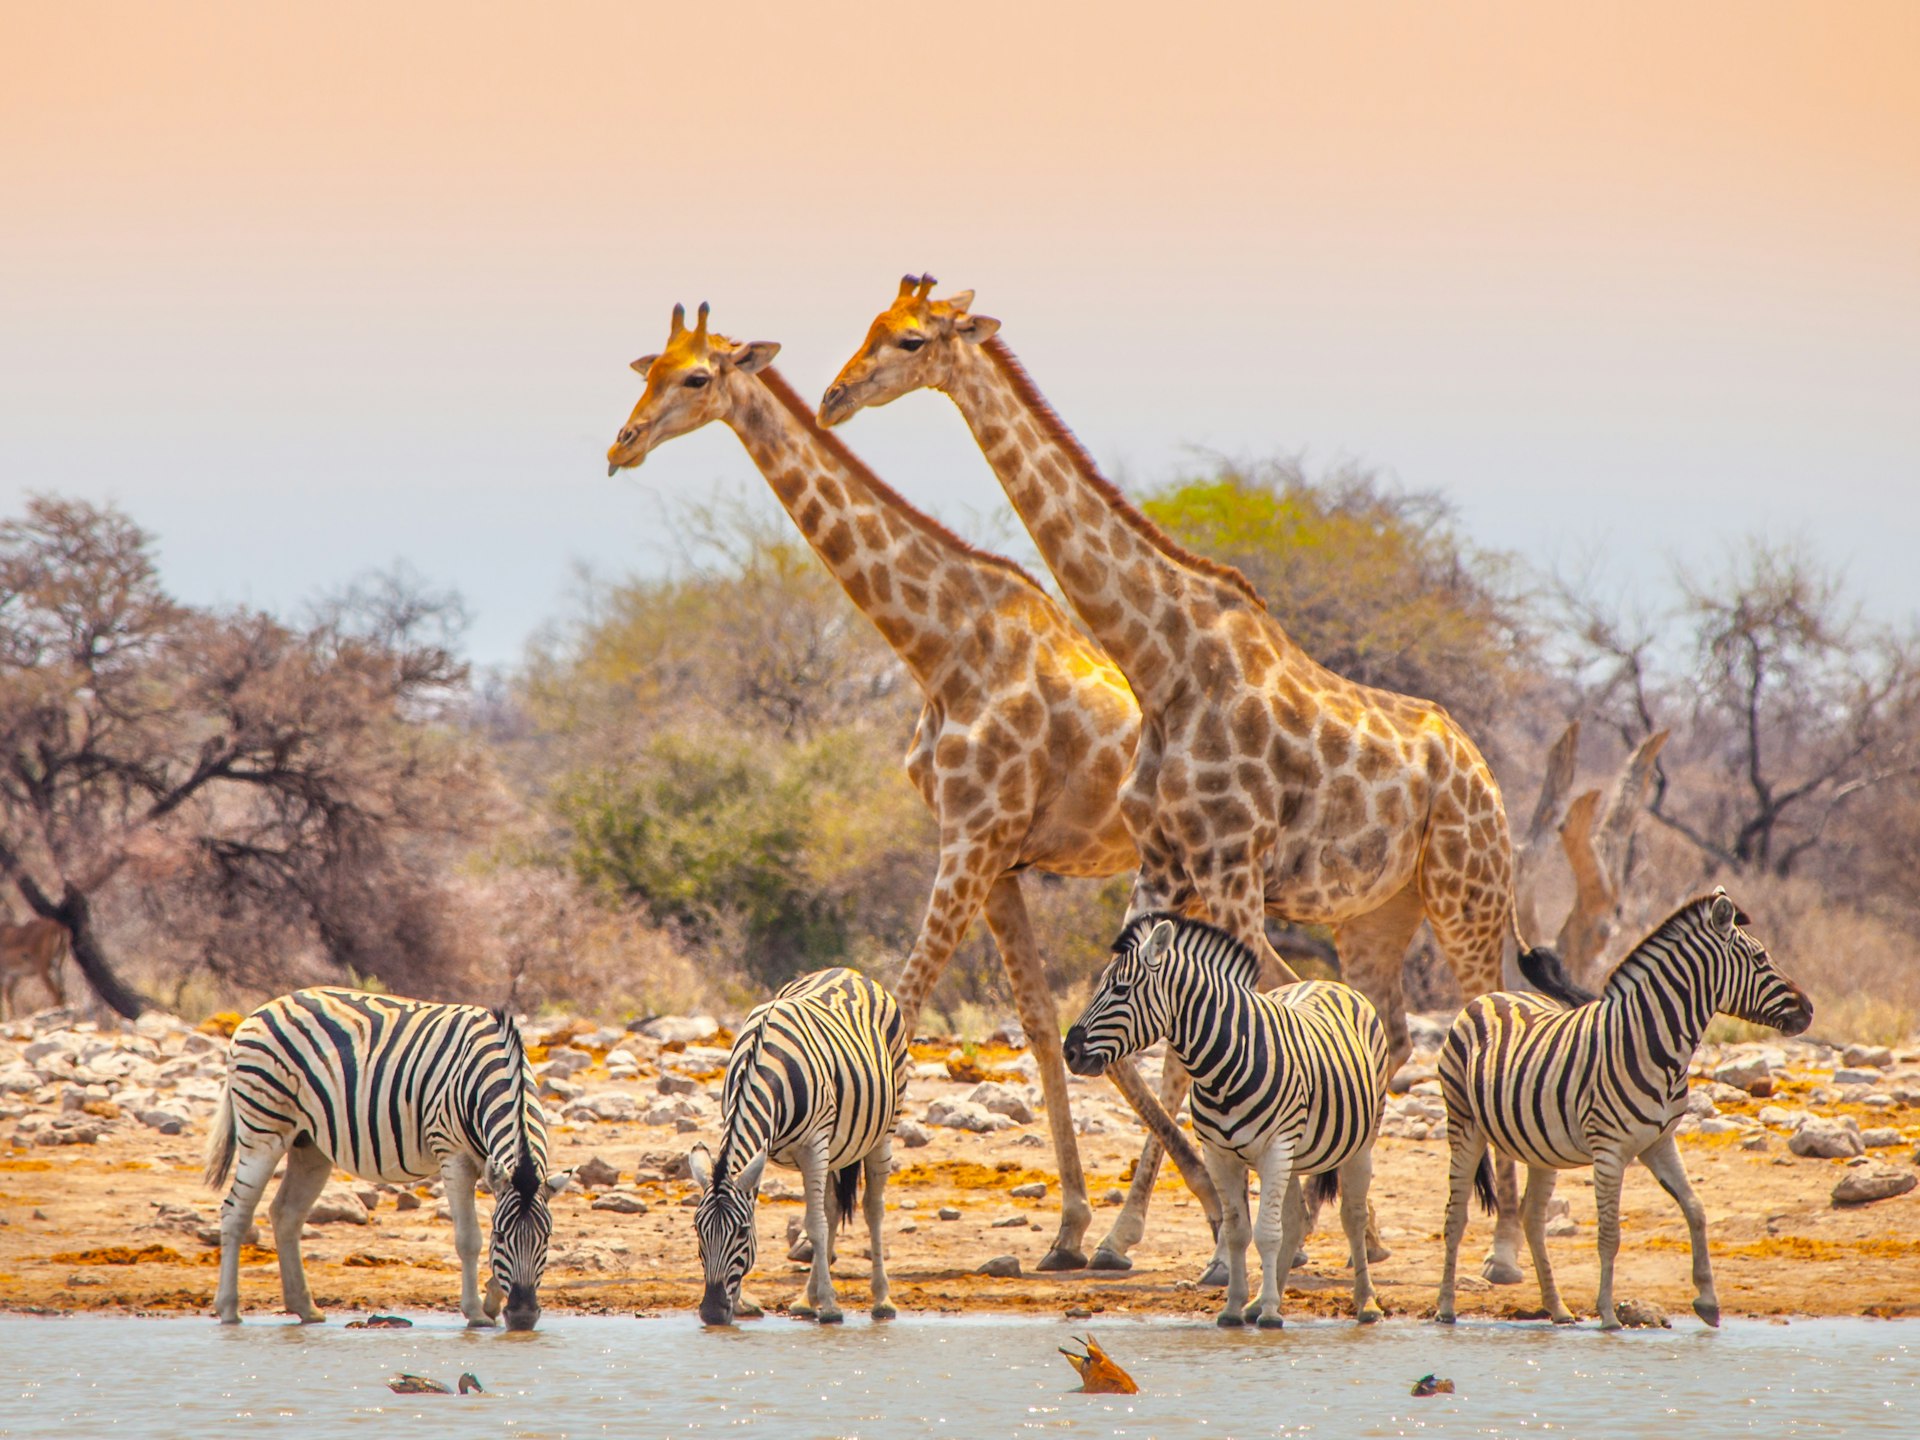 Giraffes and zebras at a waterhole in Namibia